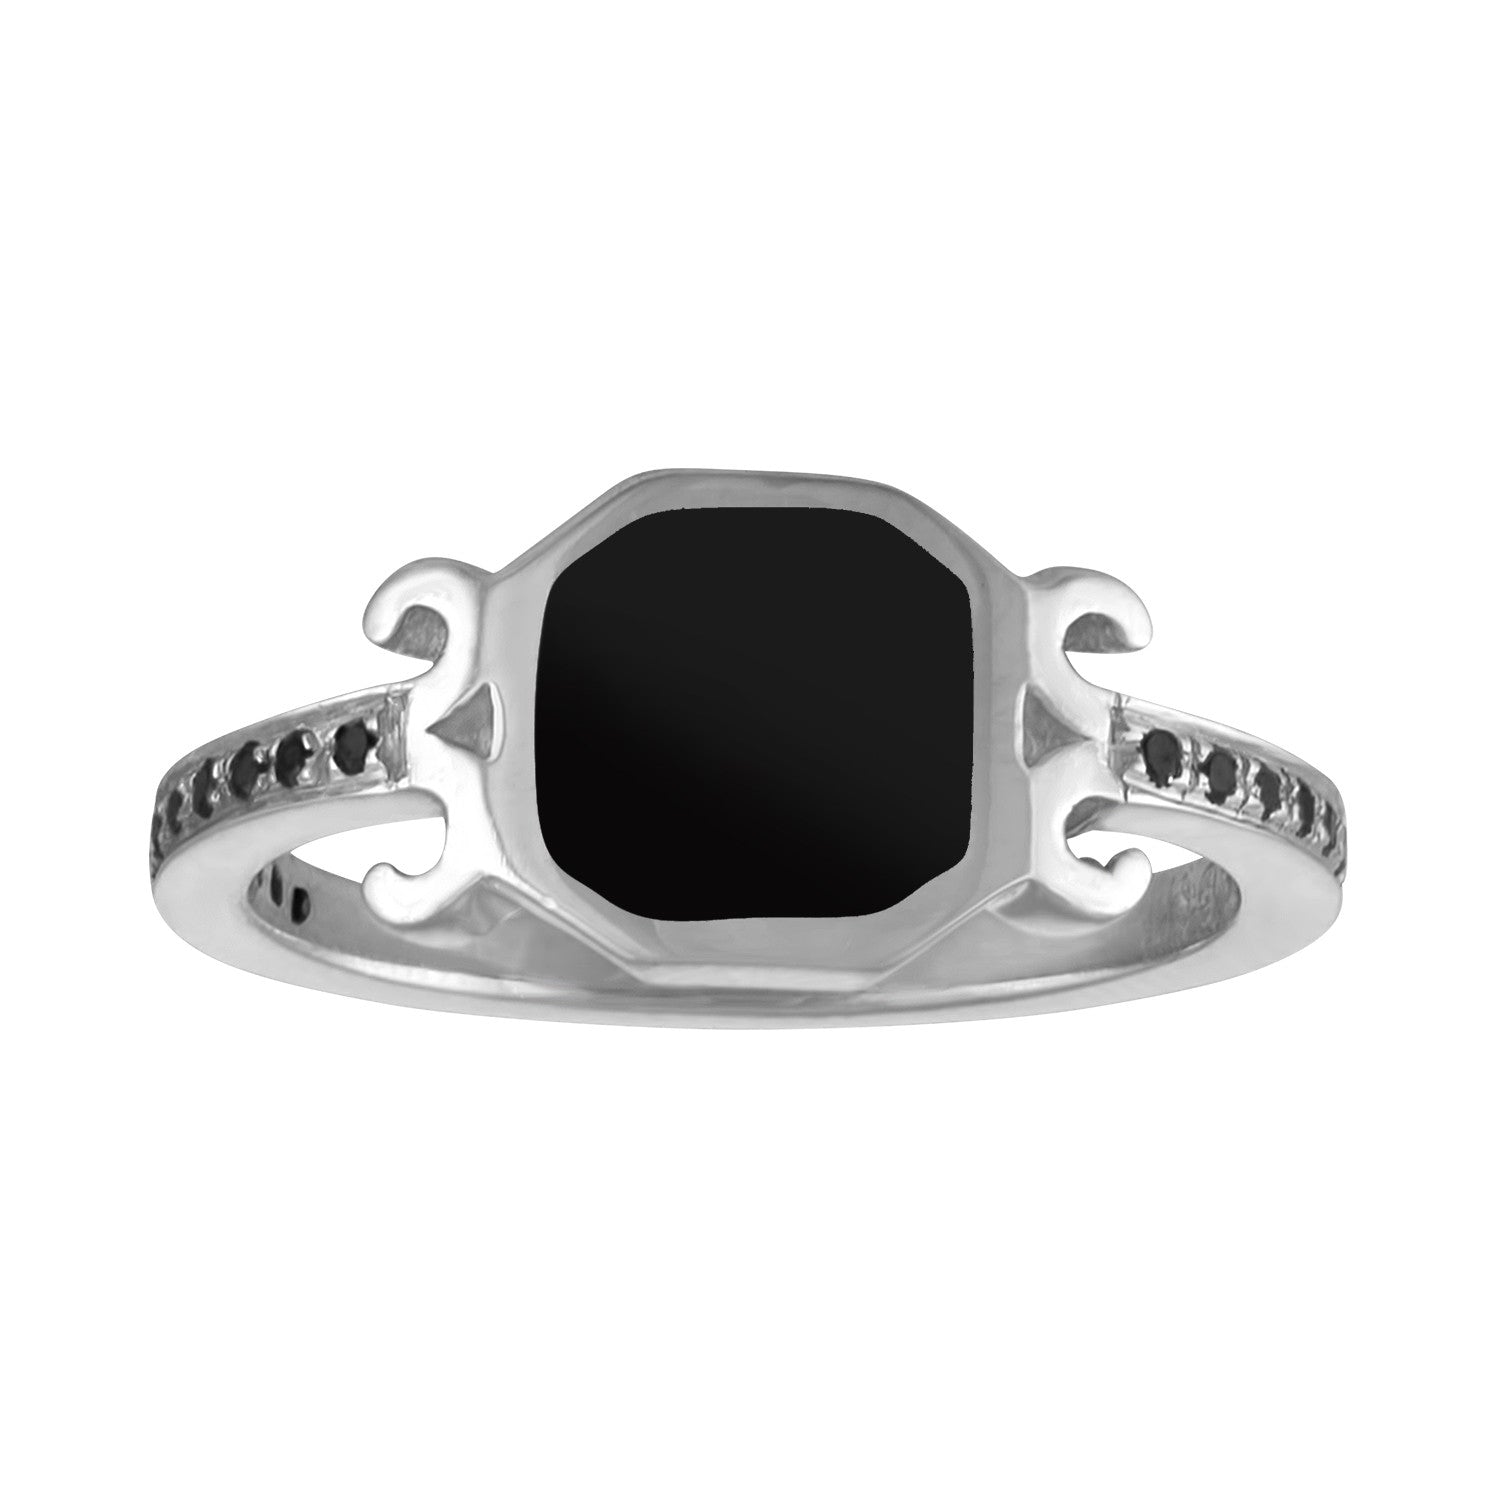 Vintage-inspired sterling silver ring with black enamel center and scroll detail with black spinels.